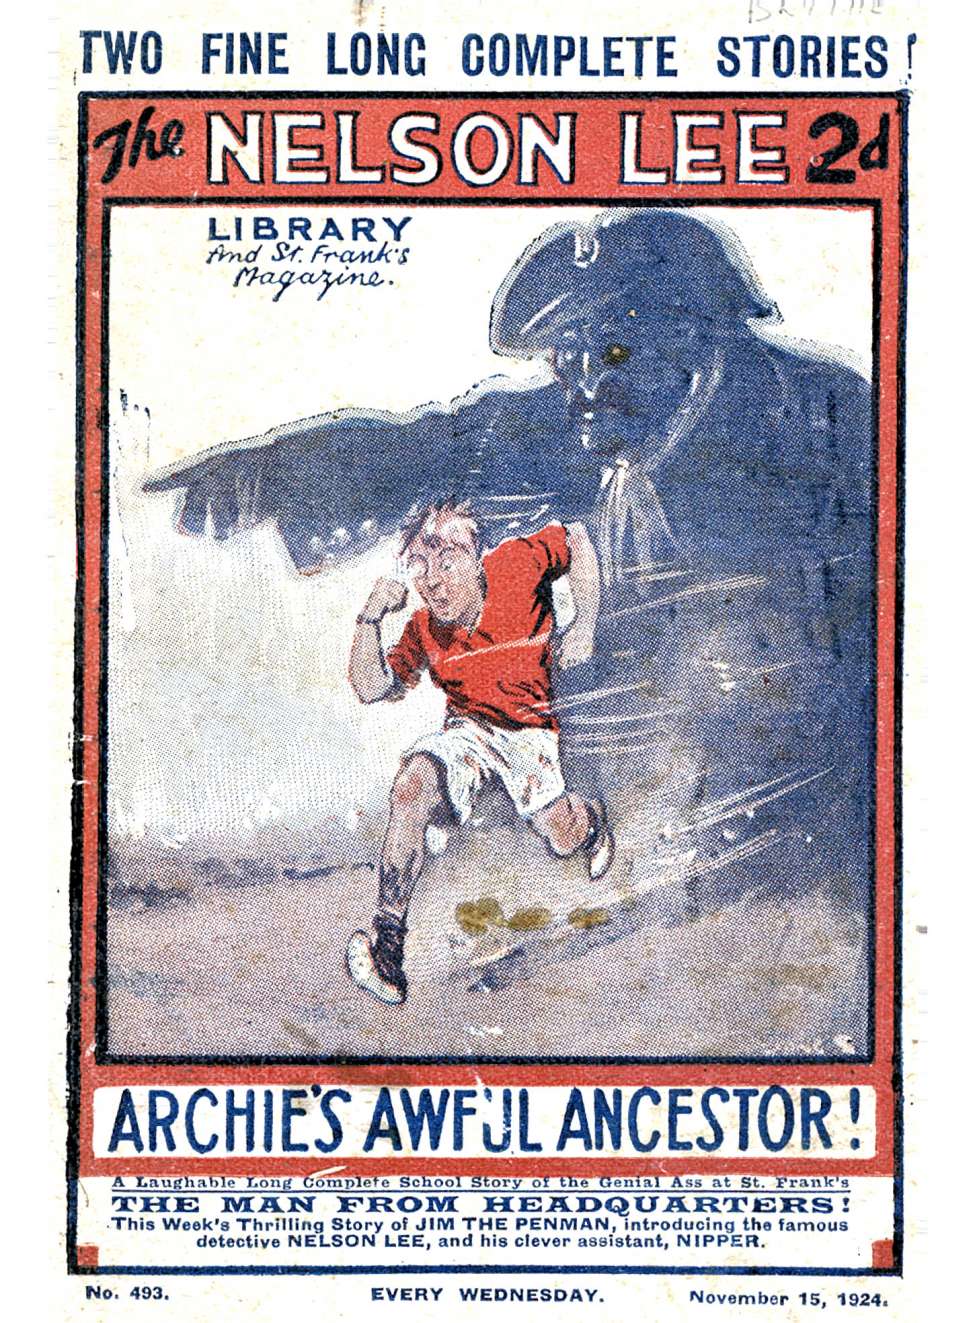 Book Cover For Nelson Lee Library s1 493 - Archie’s Awful Ancestor